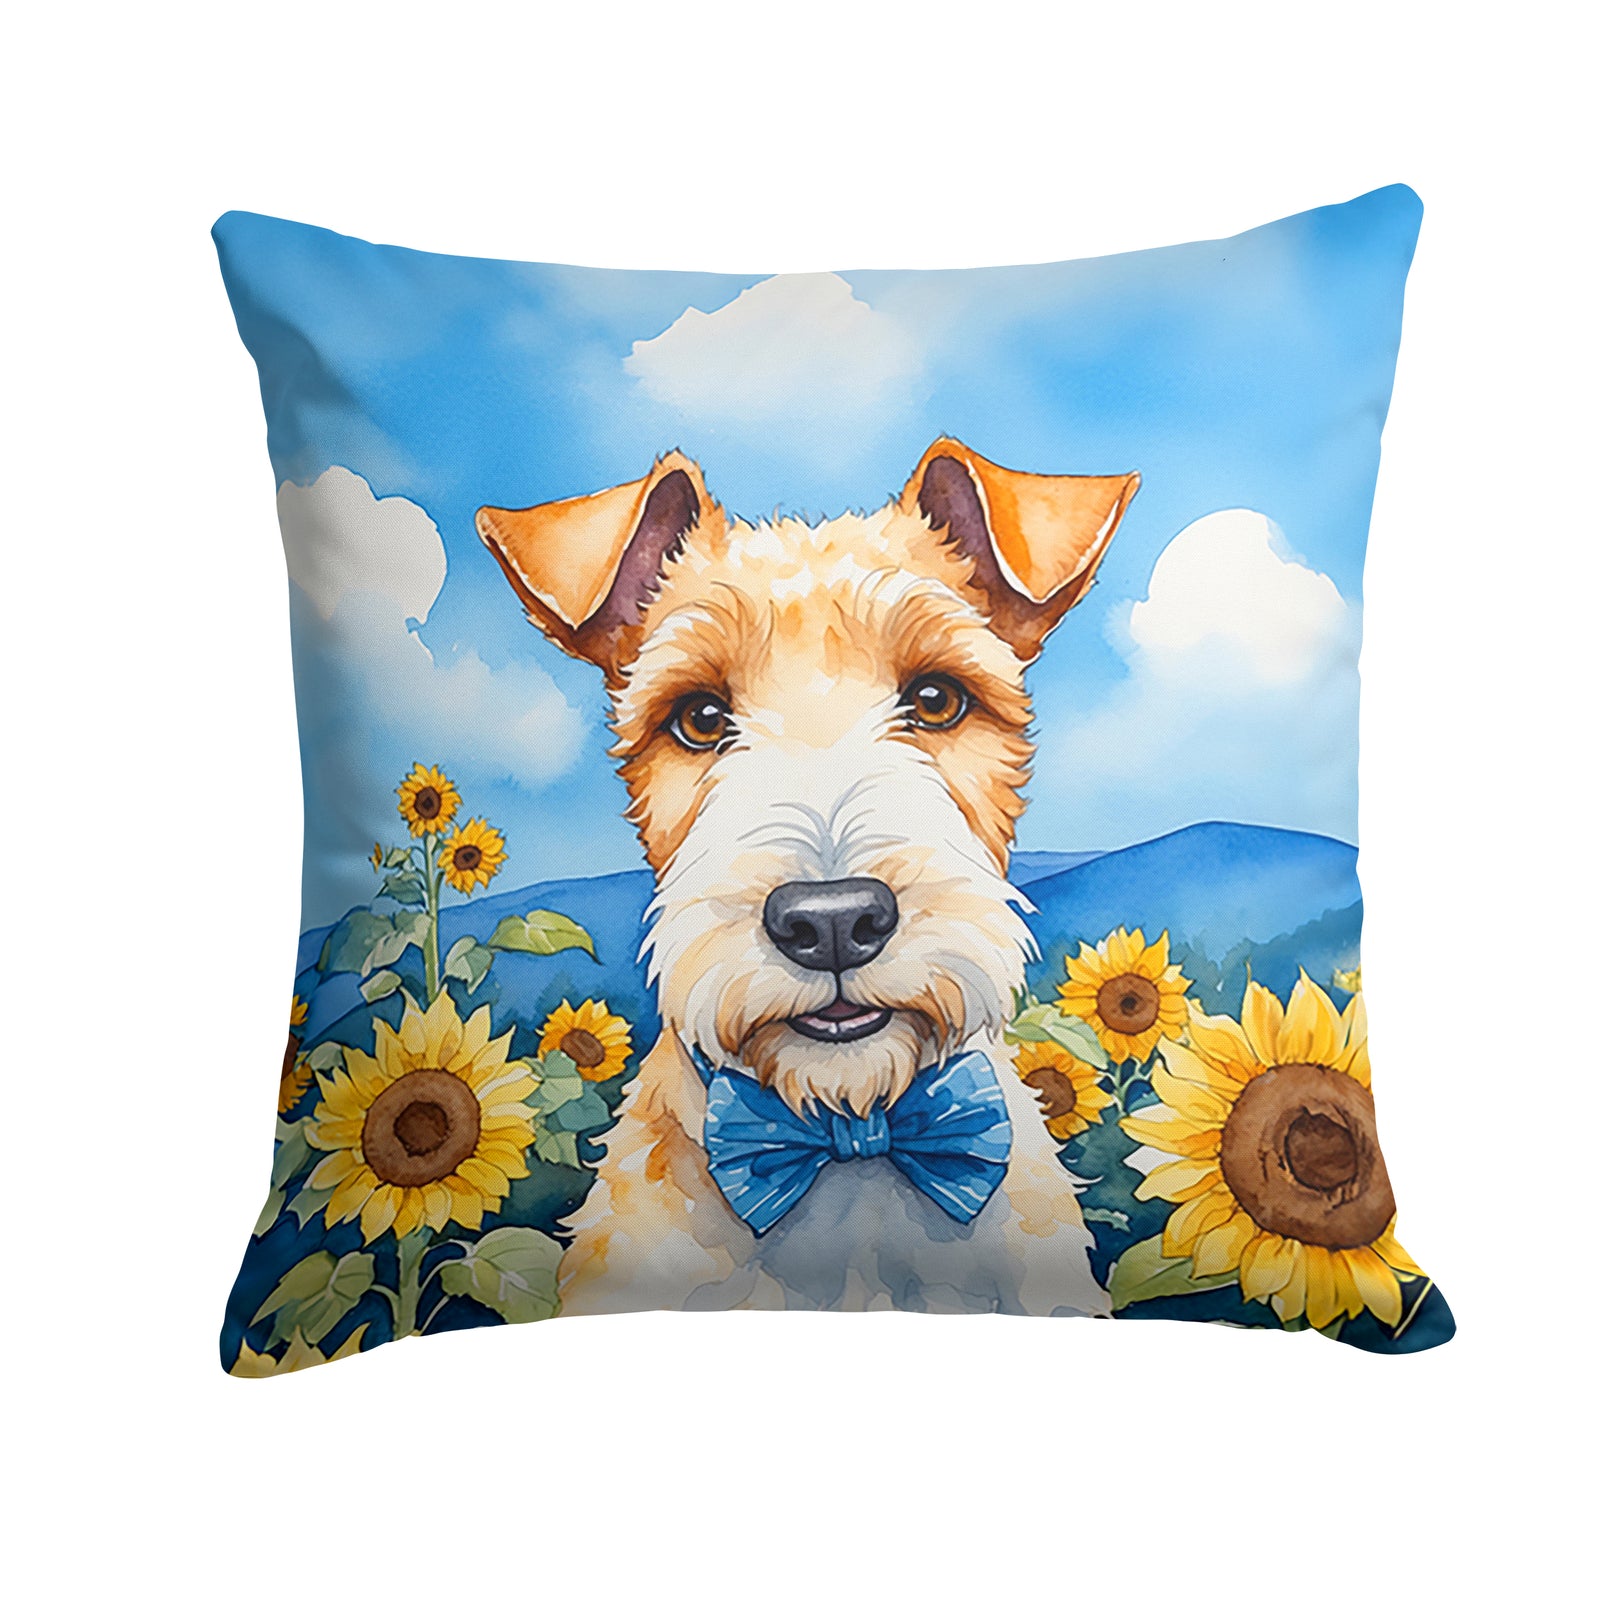 Buy this Fox Terrier in Sunflowers Throw Pillow